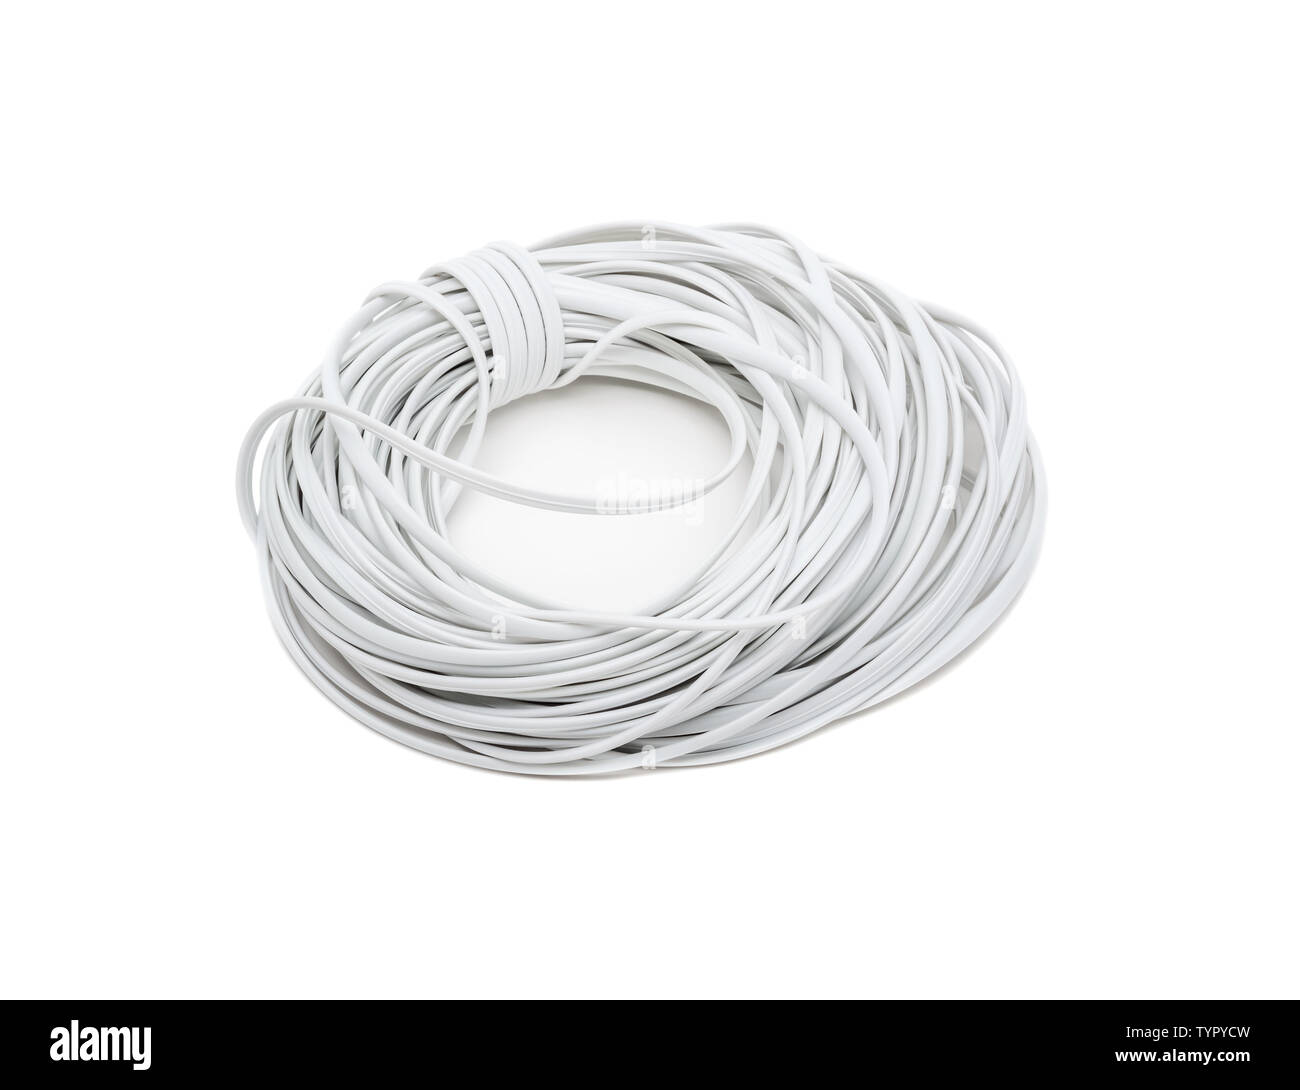 White cable wire roll isolated on white background Stock Photo - Alamy